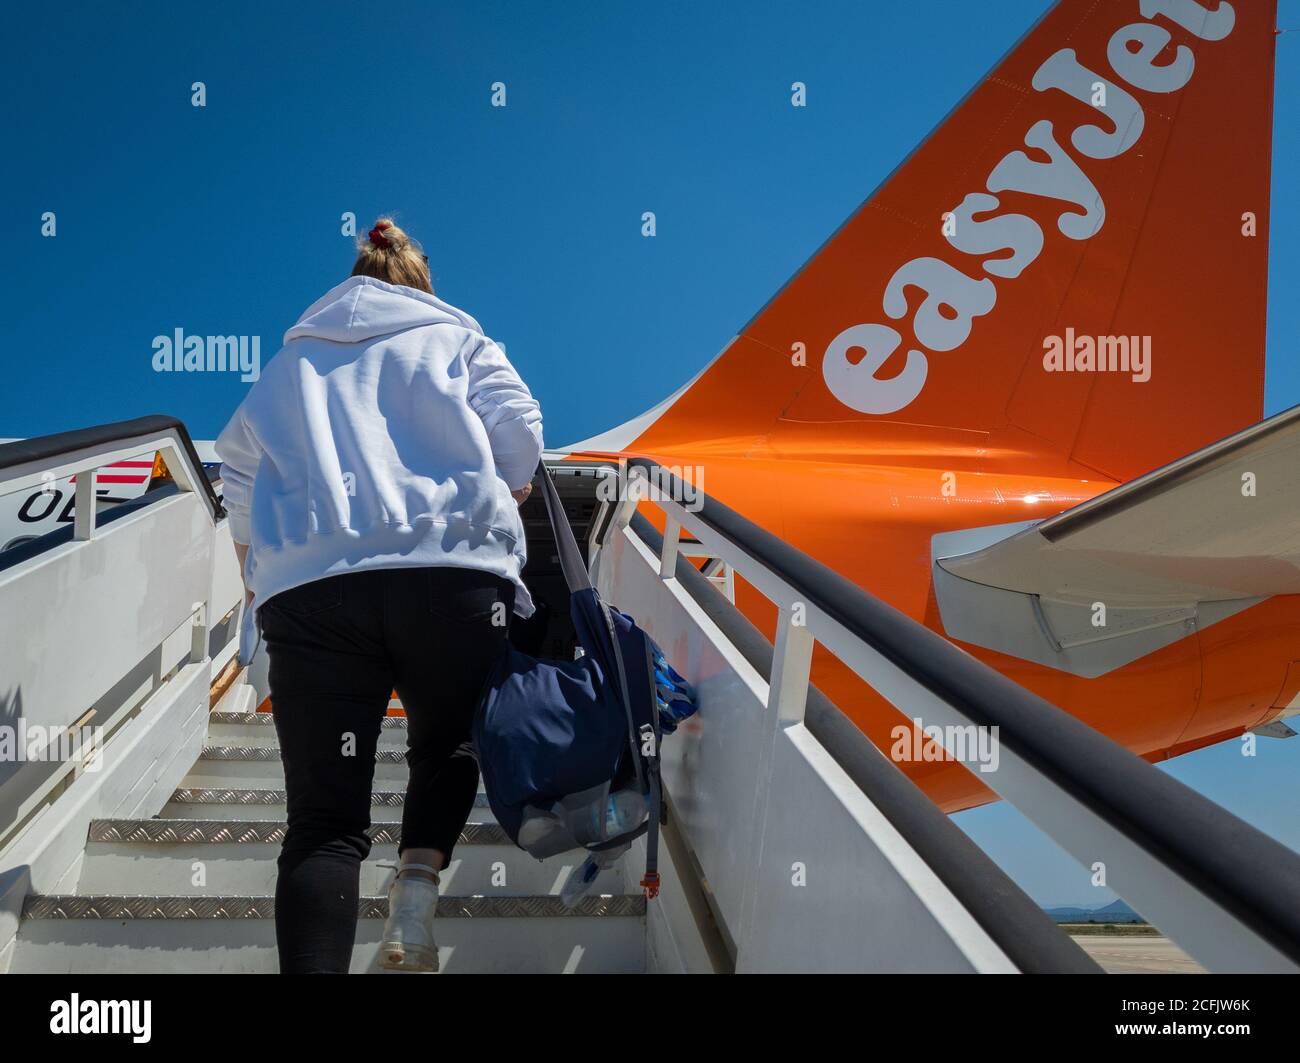 Air passengers boarding a EasyJet flight in Aktion airport. Stock Photo